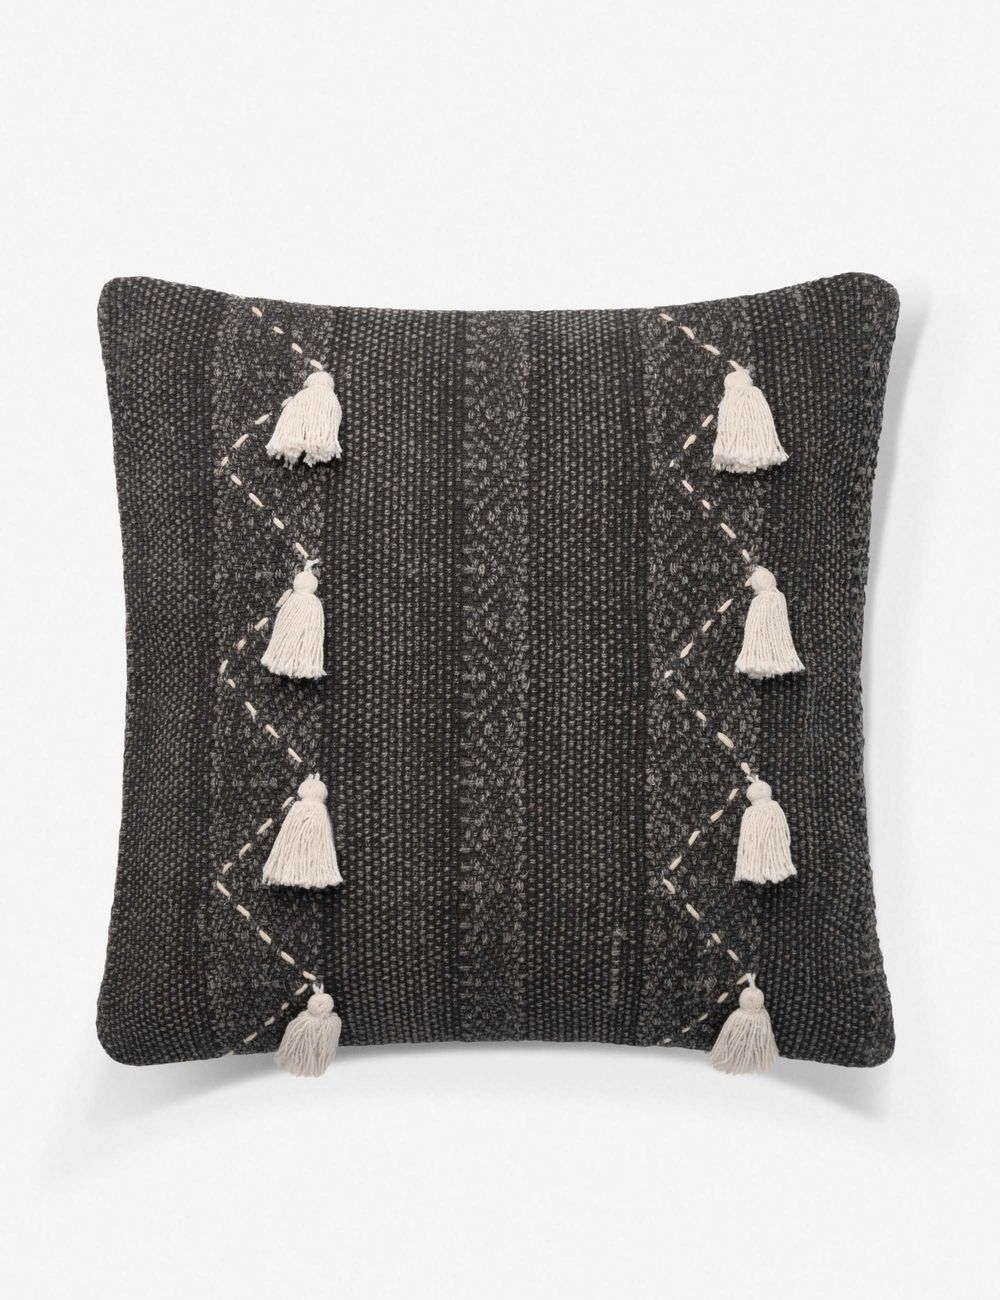 Pantina Pillow, Charcoal and Natural, ED Ellen DeGeneres Crafted by Loloi - Image 0